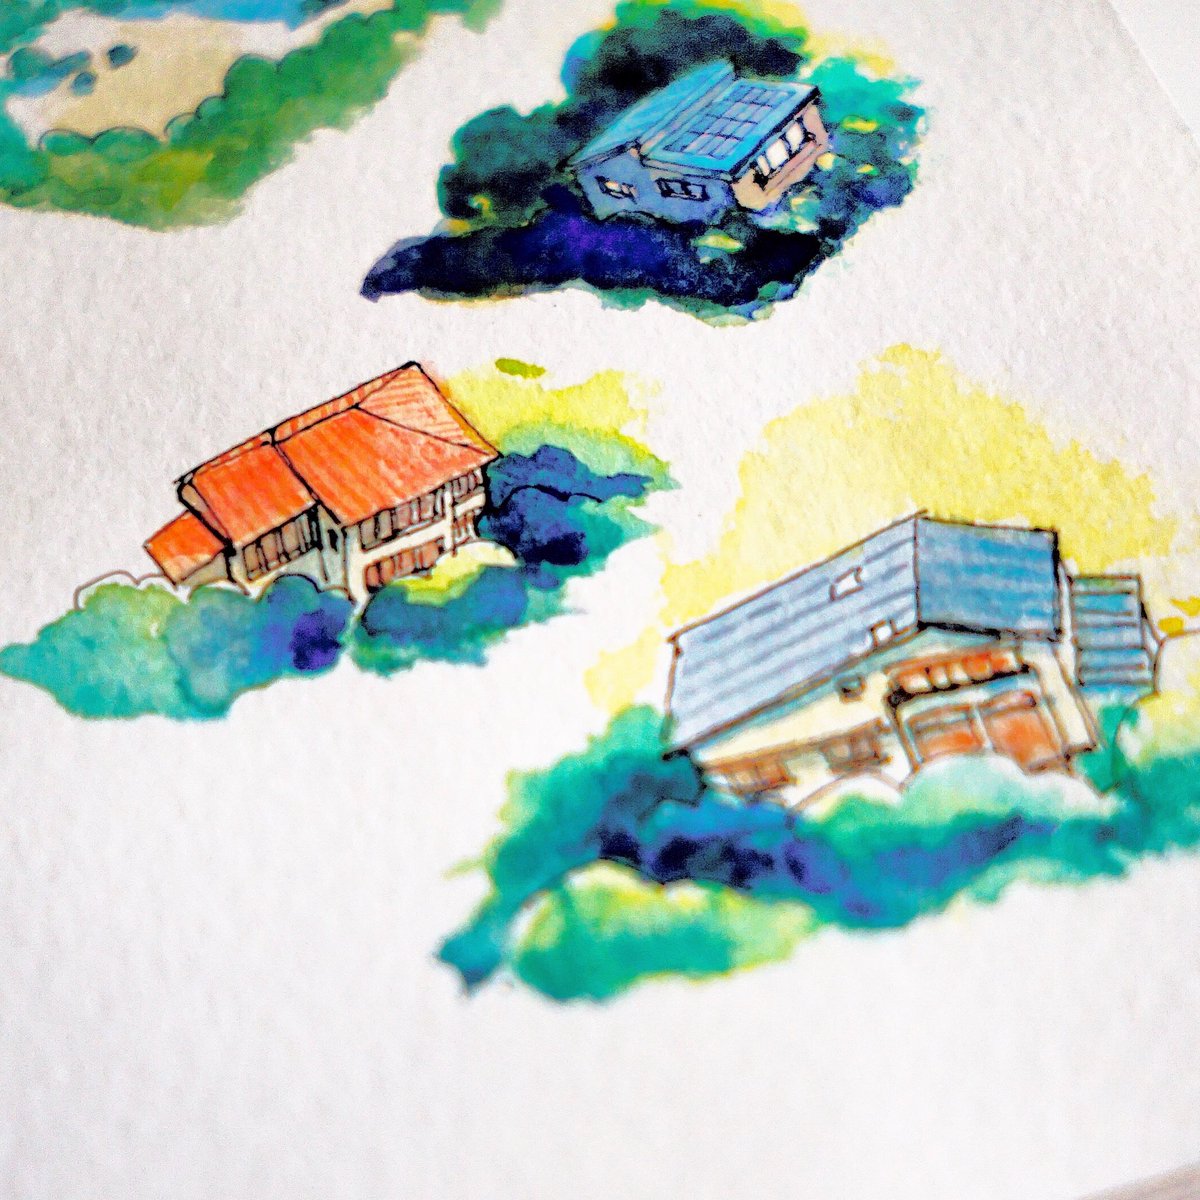 quick and simple houses from J/Japan #azsketchbook #japanesearchitecture #watercolour